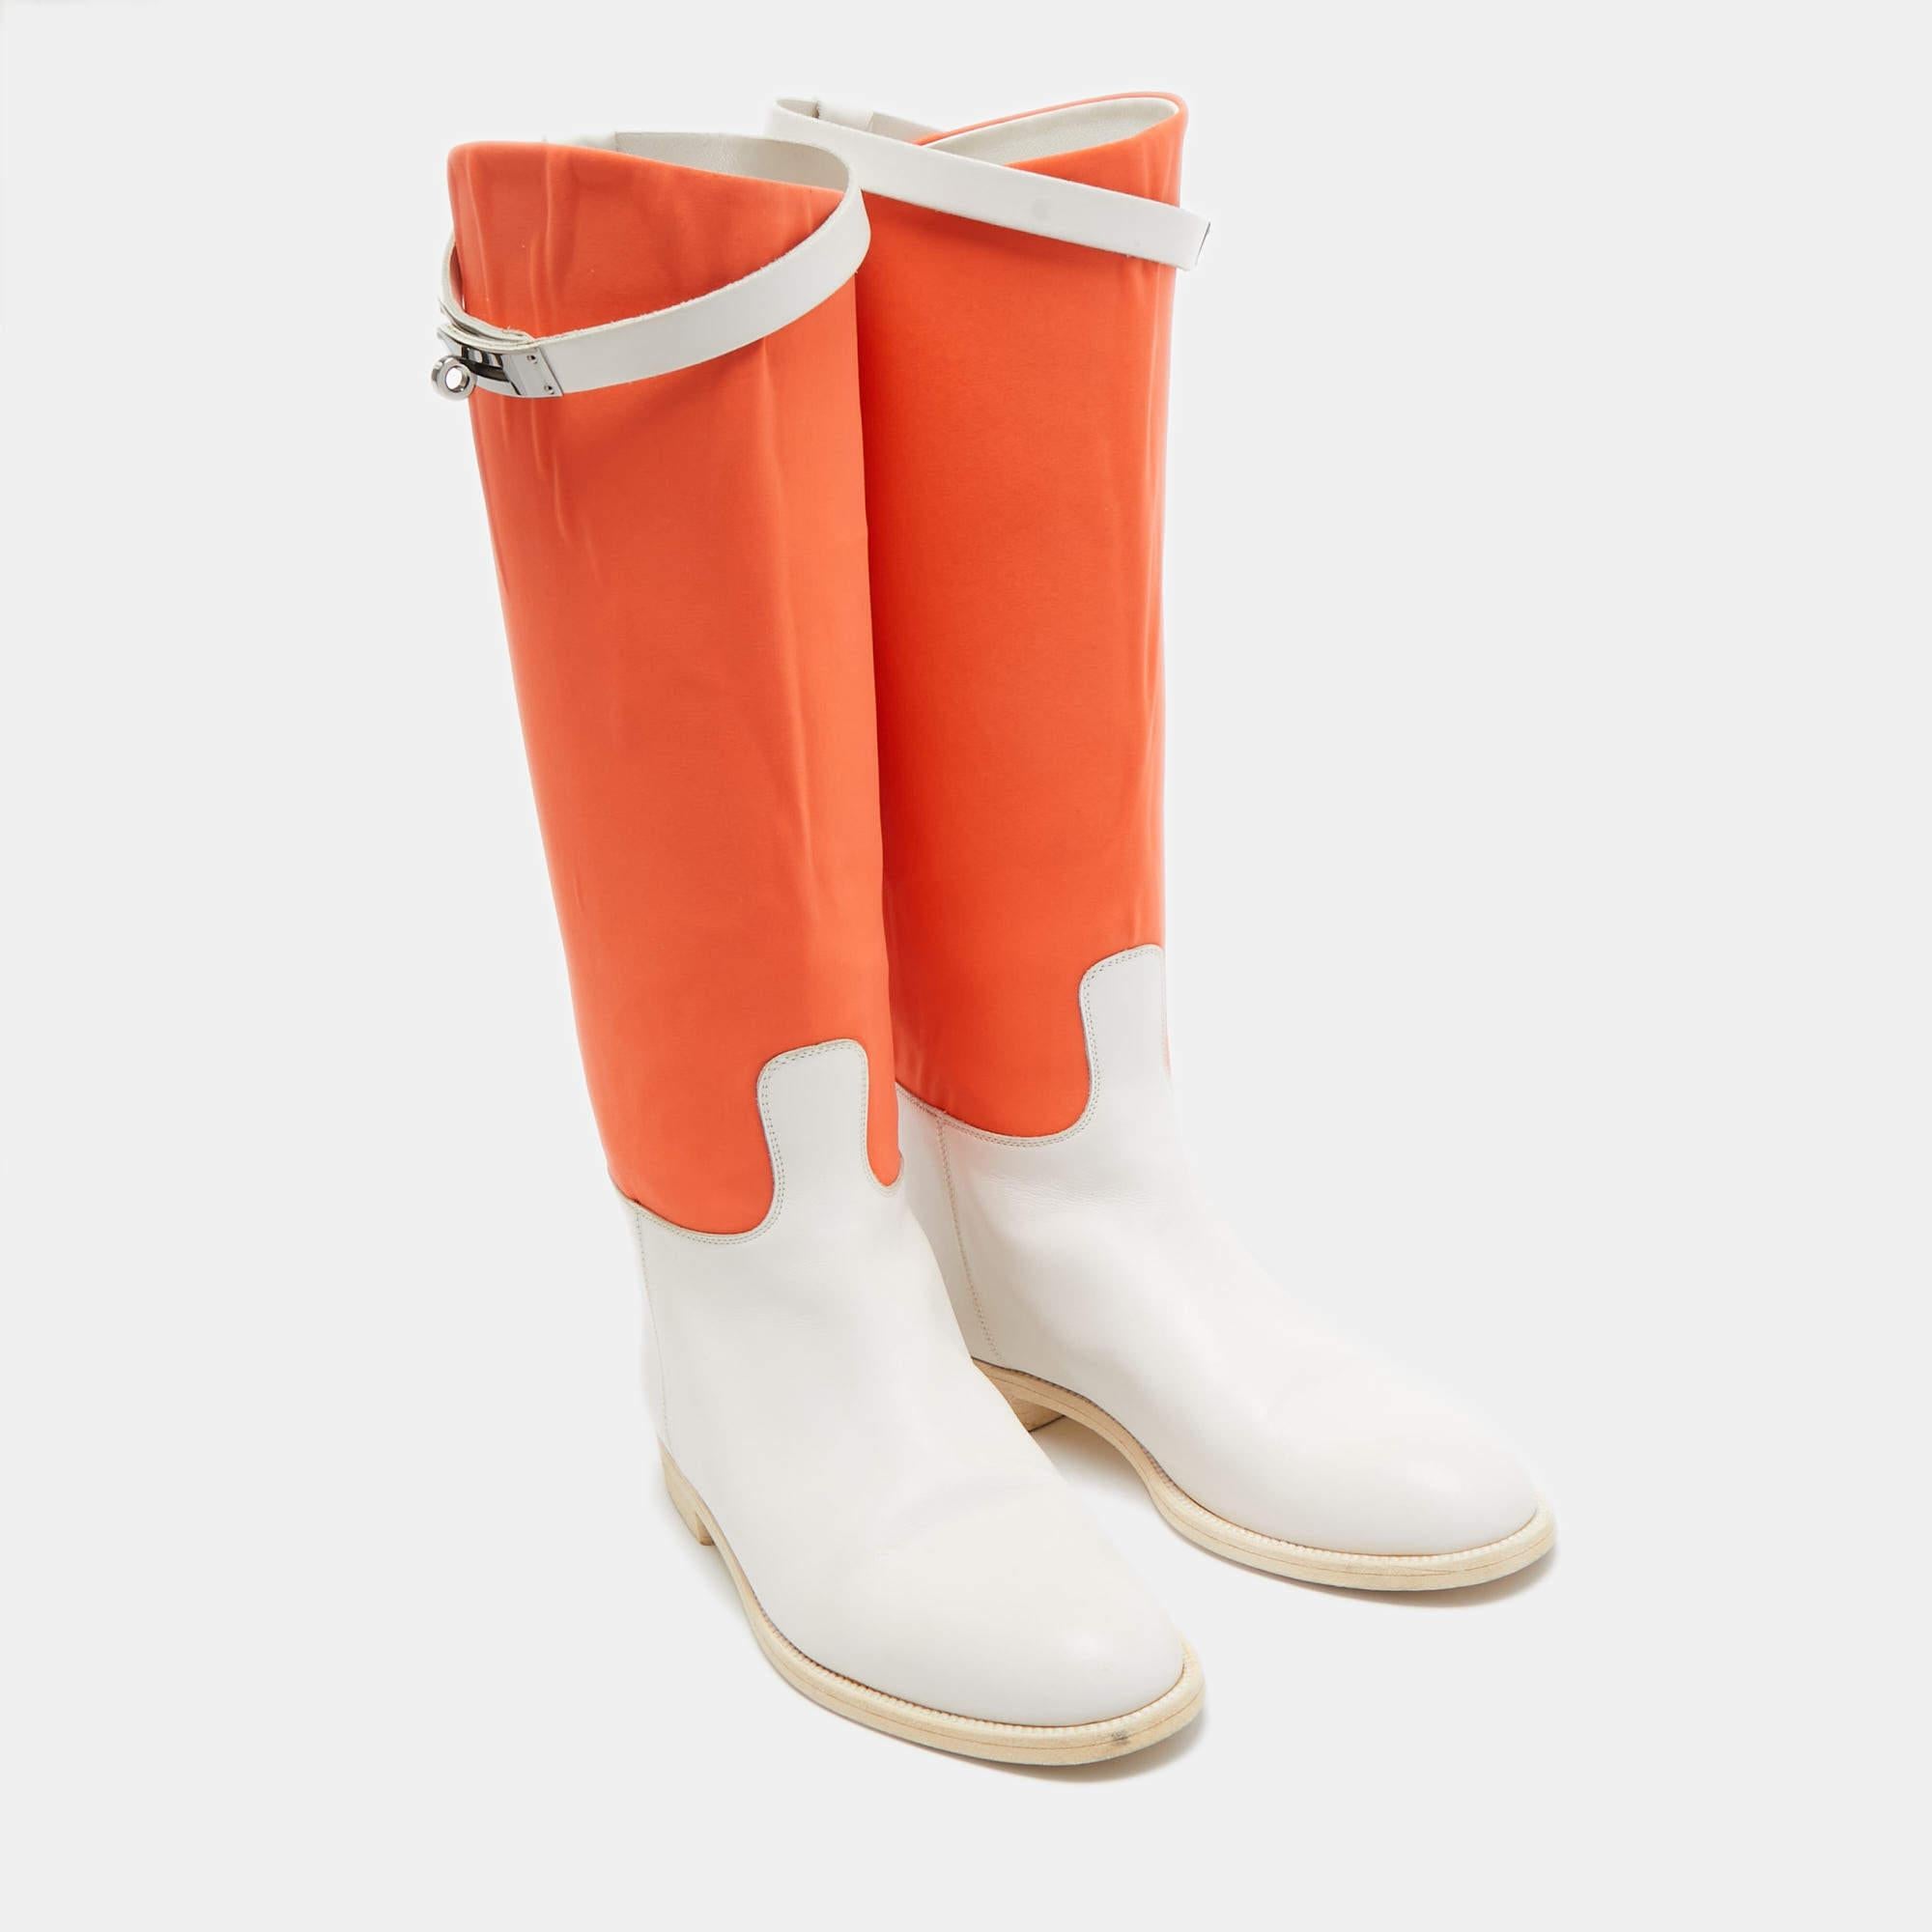 Hermes Neon Orange/White Neoprene and Leather Jumping Boots Size 39 In Good Condition For Sale In Dubai, Al Qouz 2